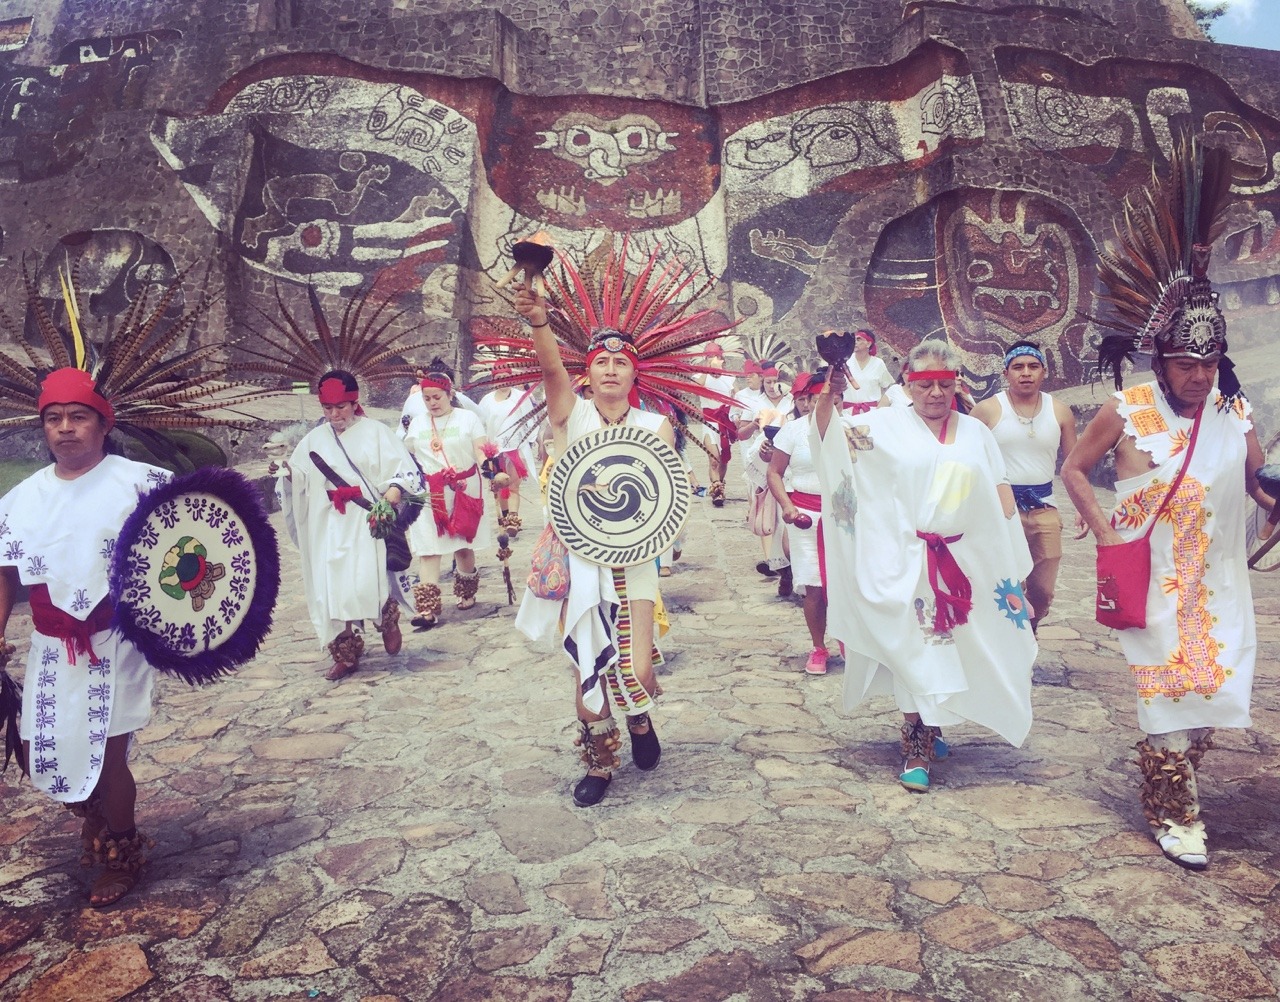 mexicaheart: The ceremony of the summer solstice at the Otomi Temple. Cultura Mexica.